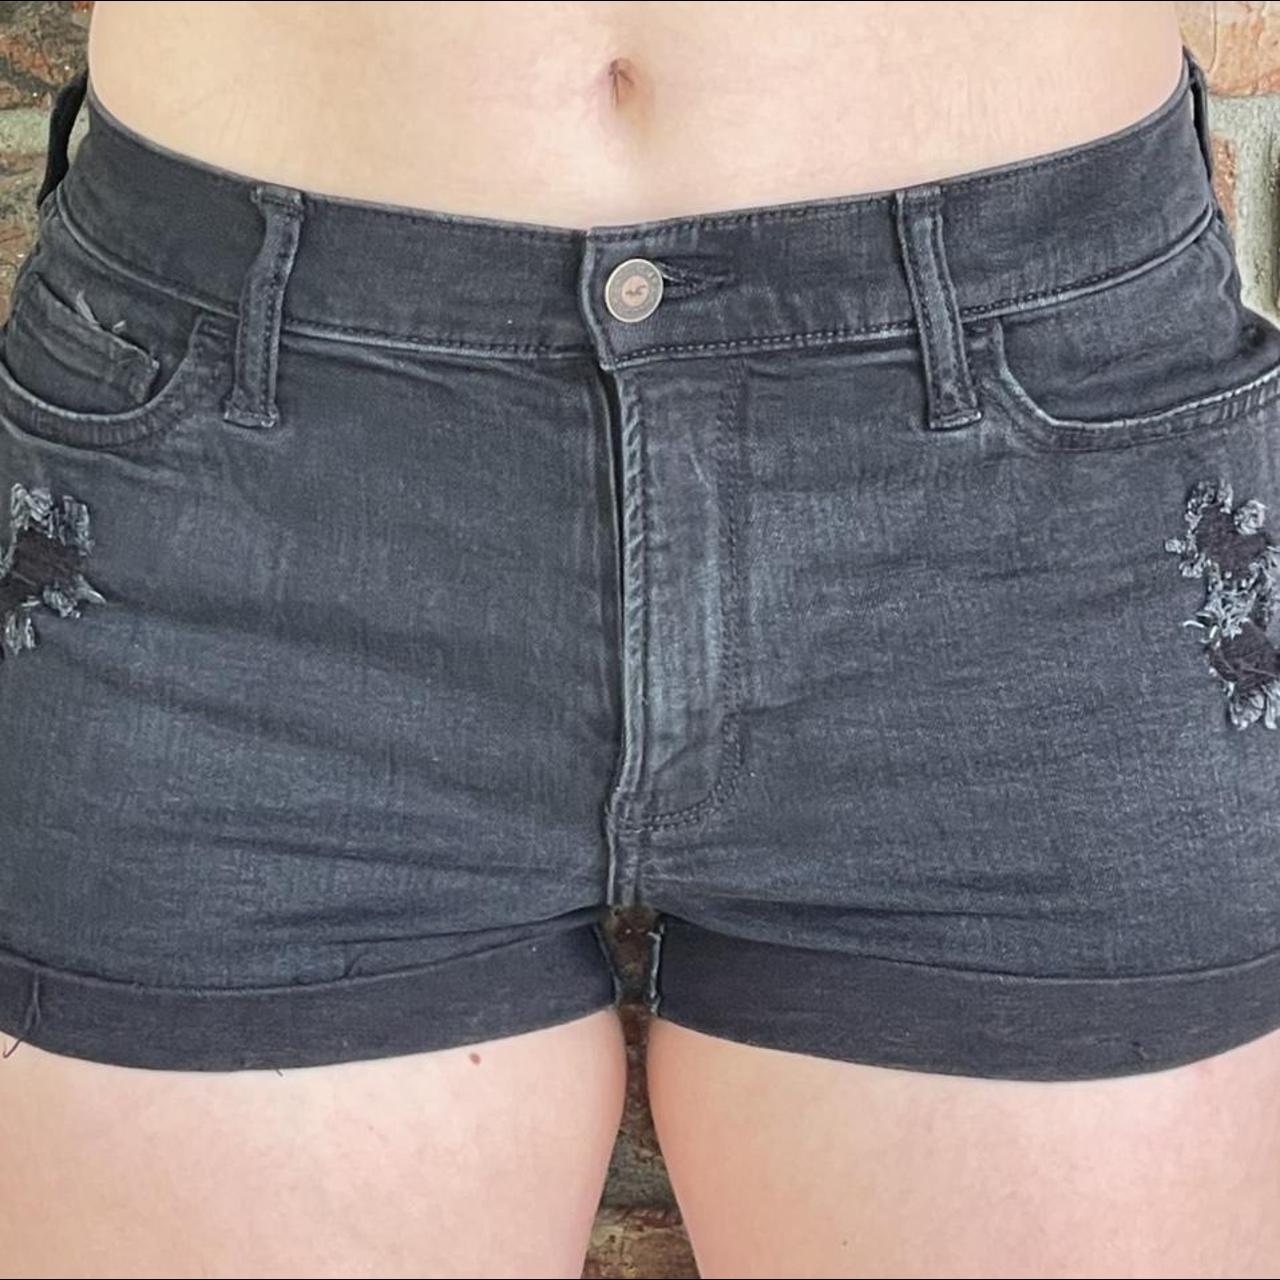 These versatile, black Hollister jean shorts are